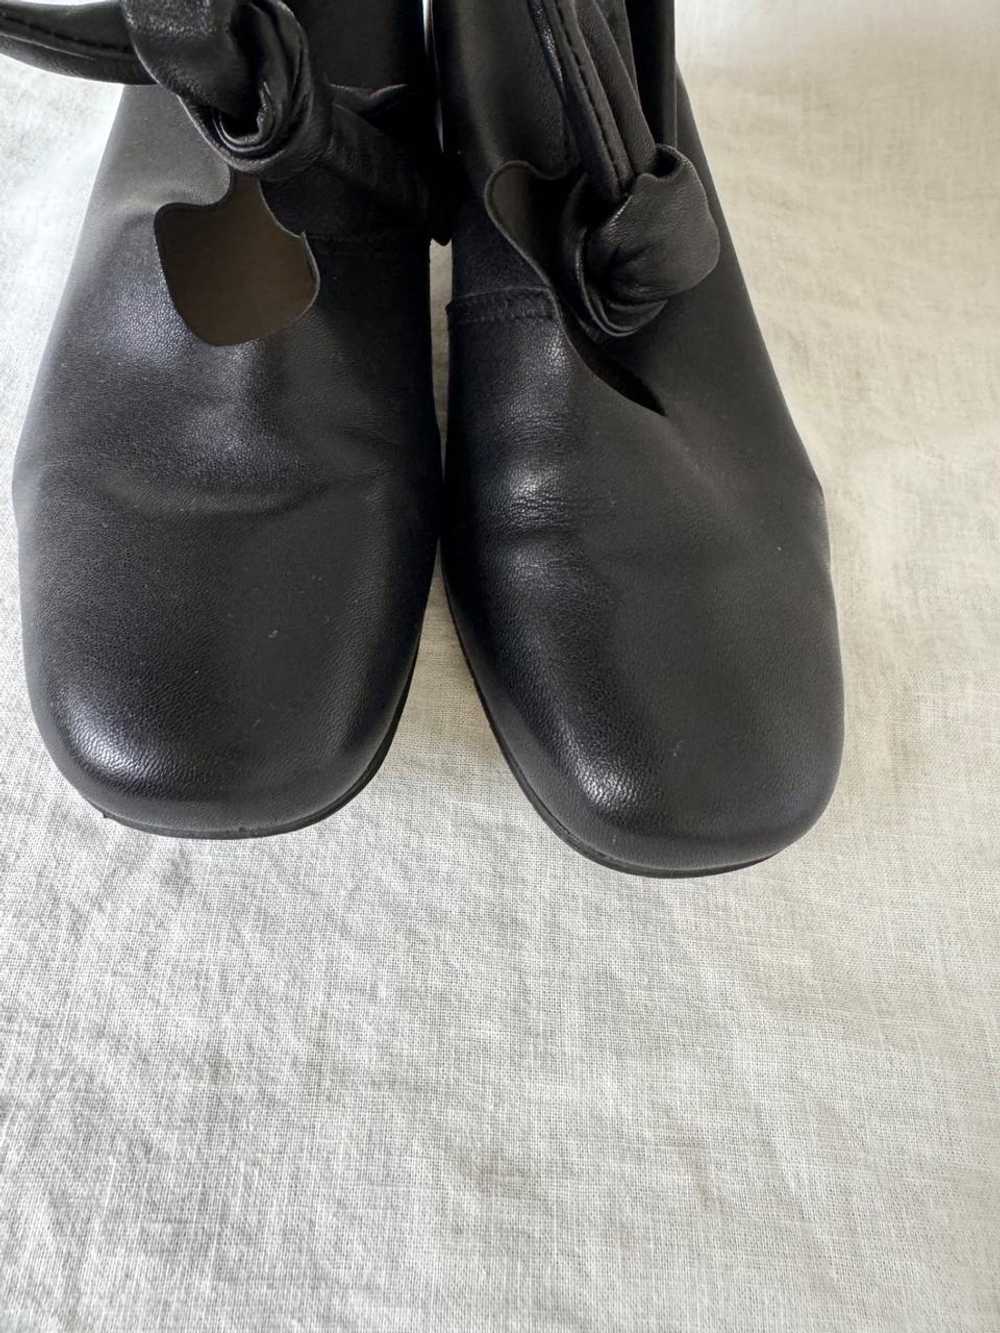 ALL BLACK tap shoe booties (37.5) | Used,… - image 3